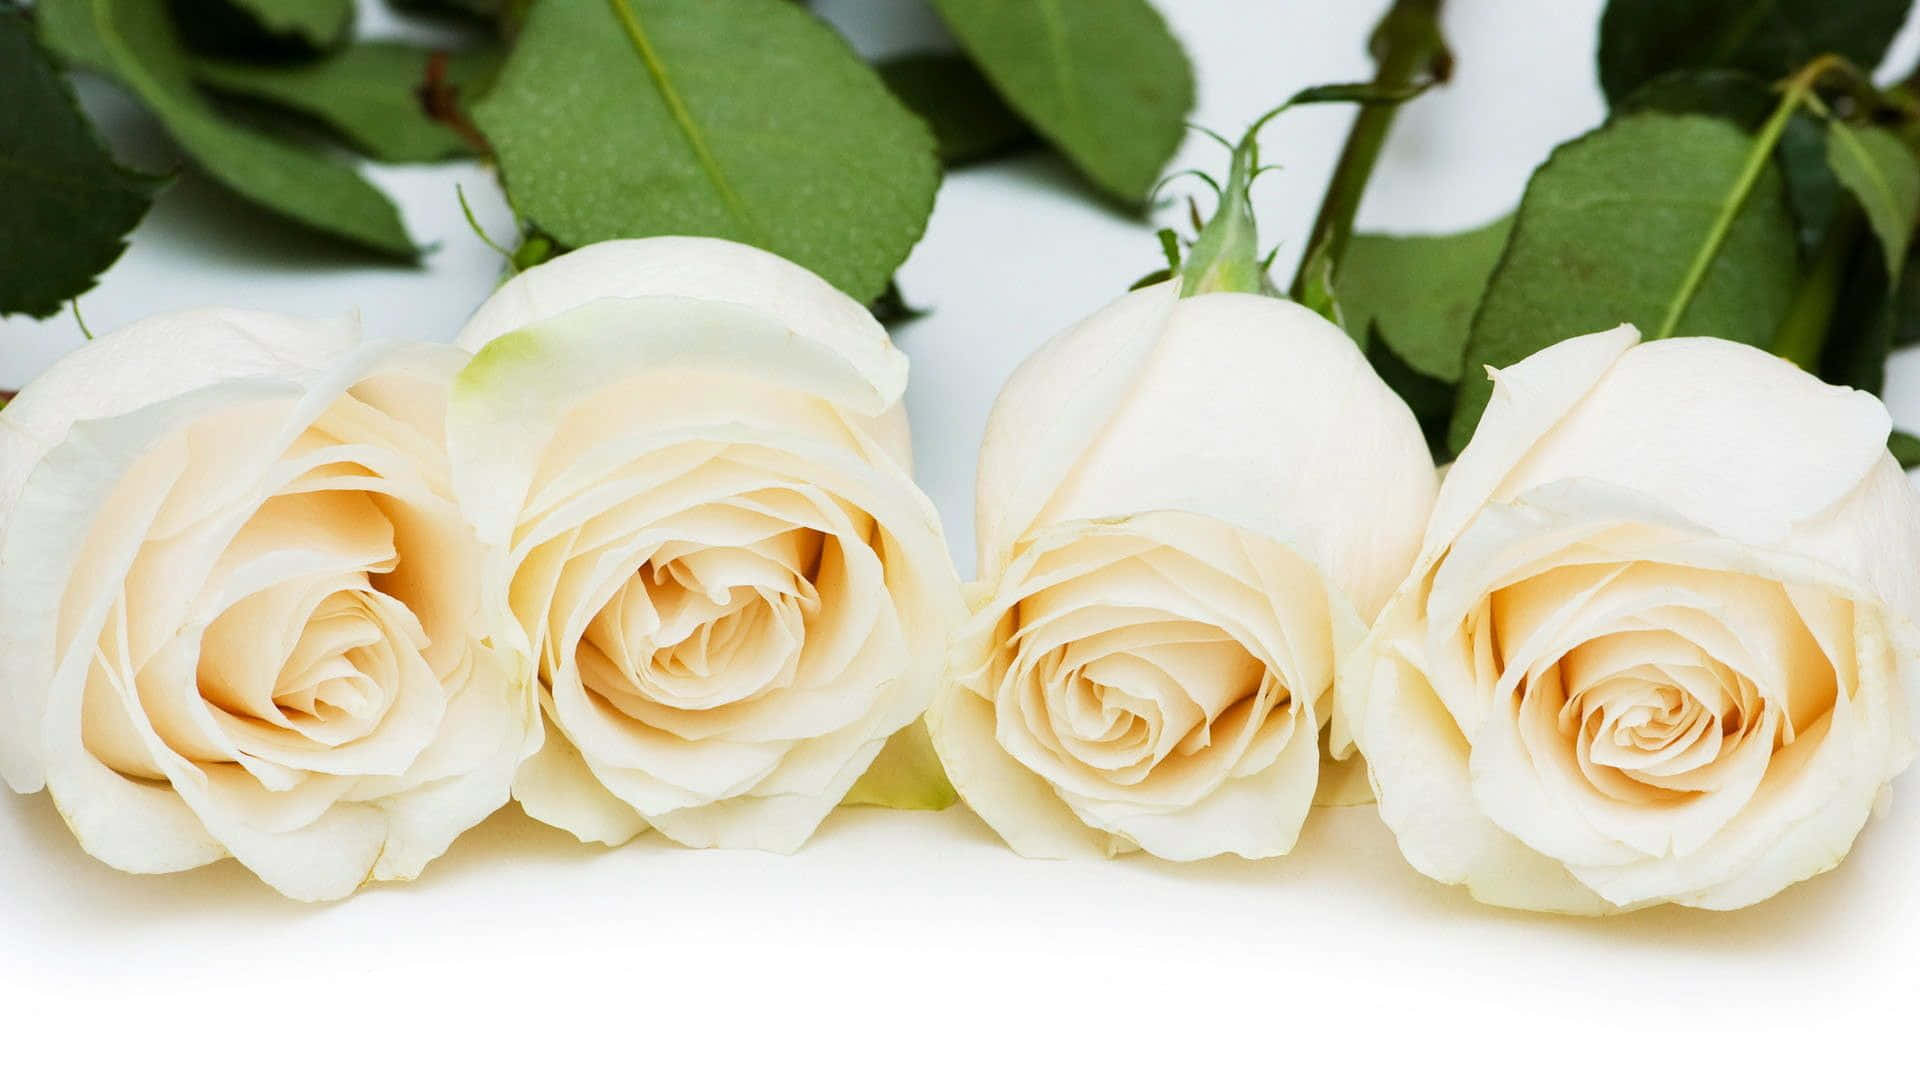 Three White Roses Are Lined Up On A White Background